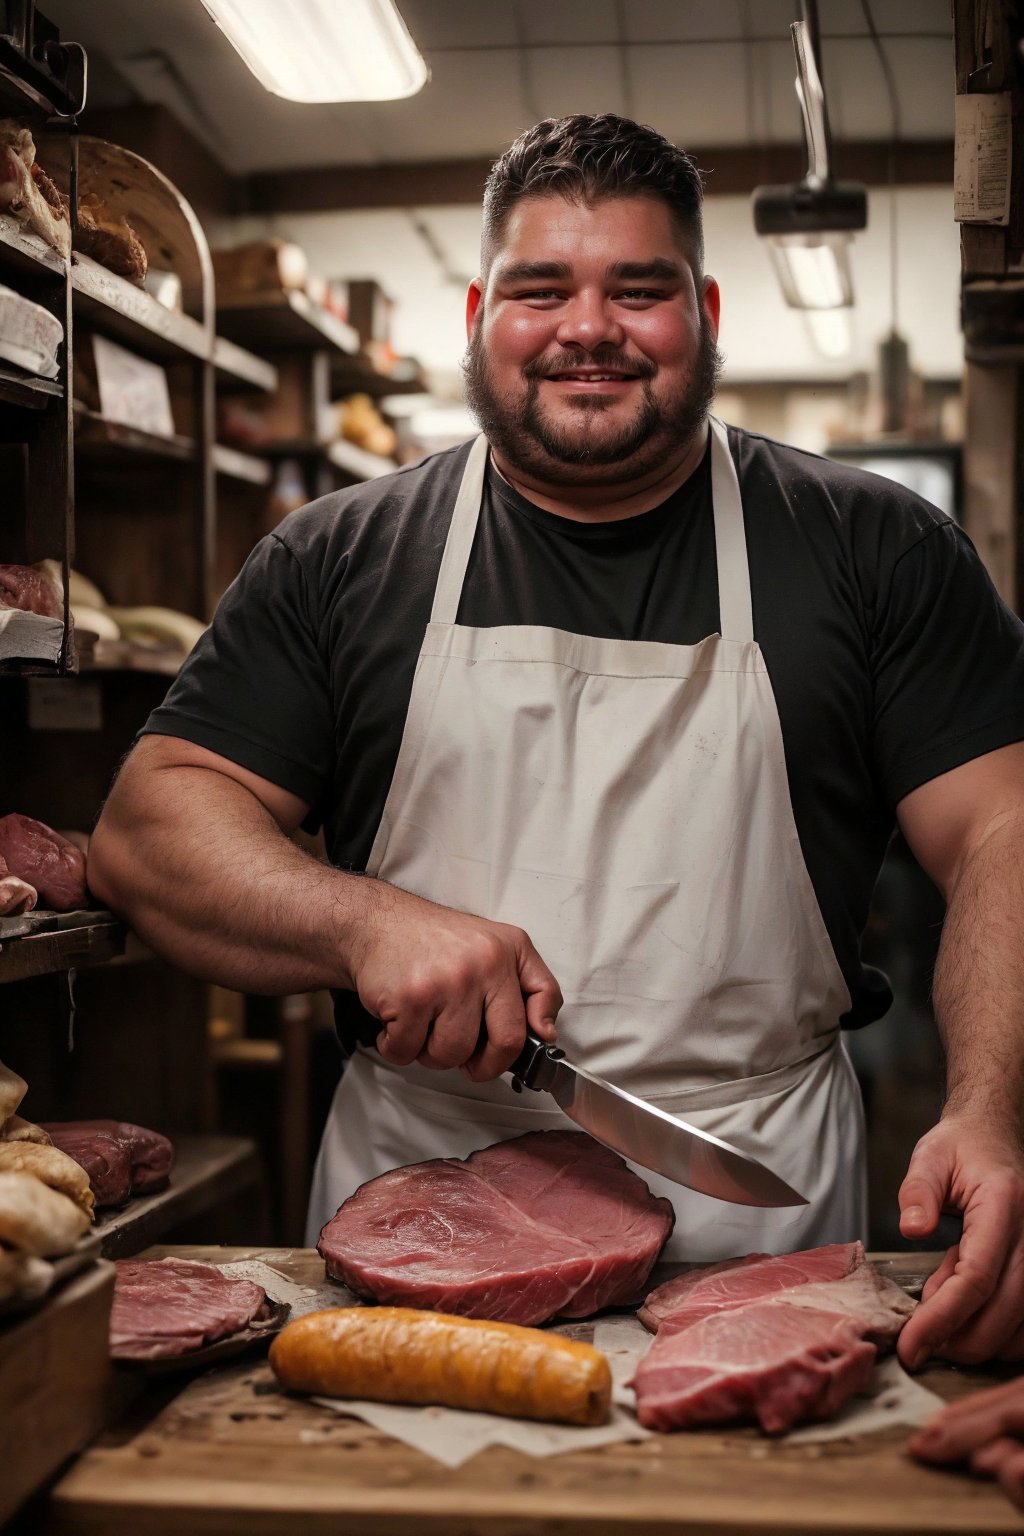 (( film grain, cinematic film, RAW photo, dark, intricate detail, grainy, niosy, gritty, vintage paper, ))
.
.
Fat man, meat cutter, 
Depict a realistic image of the butcher in his shop, surrounded by hanging cuts of meat, his face beaming with pride as he sharpens his knife.